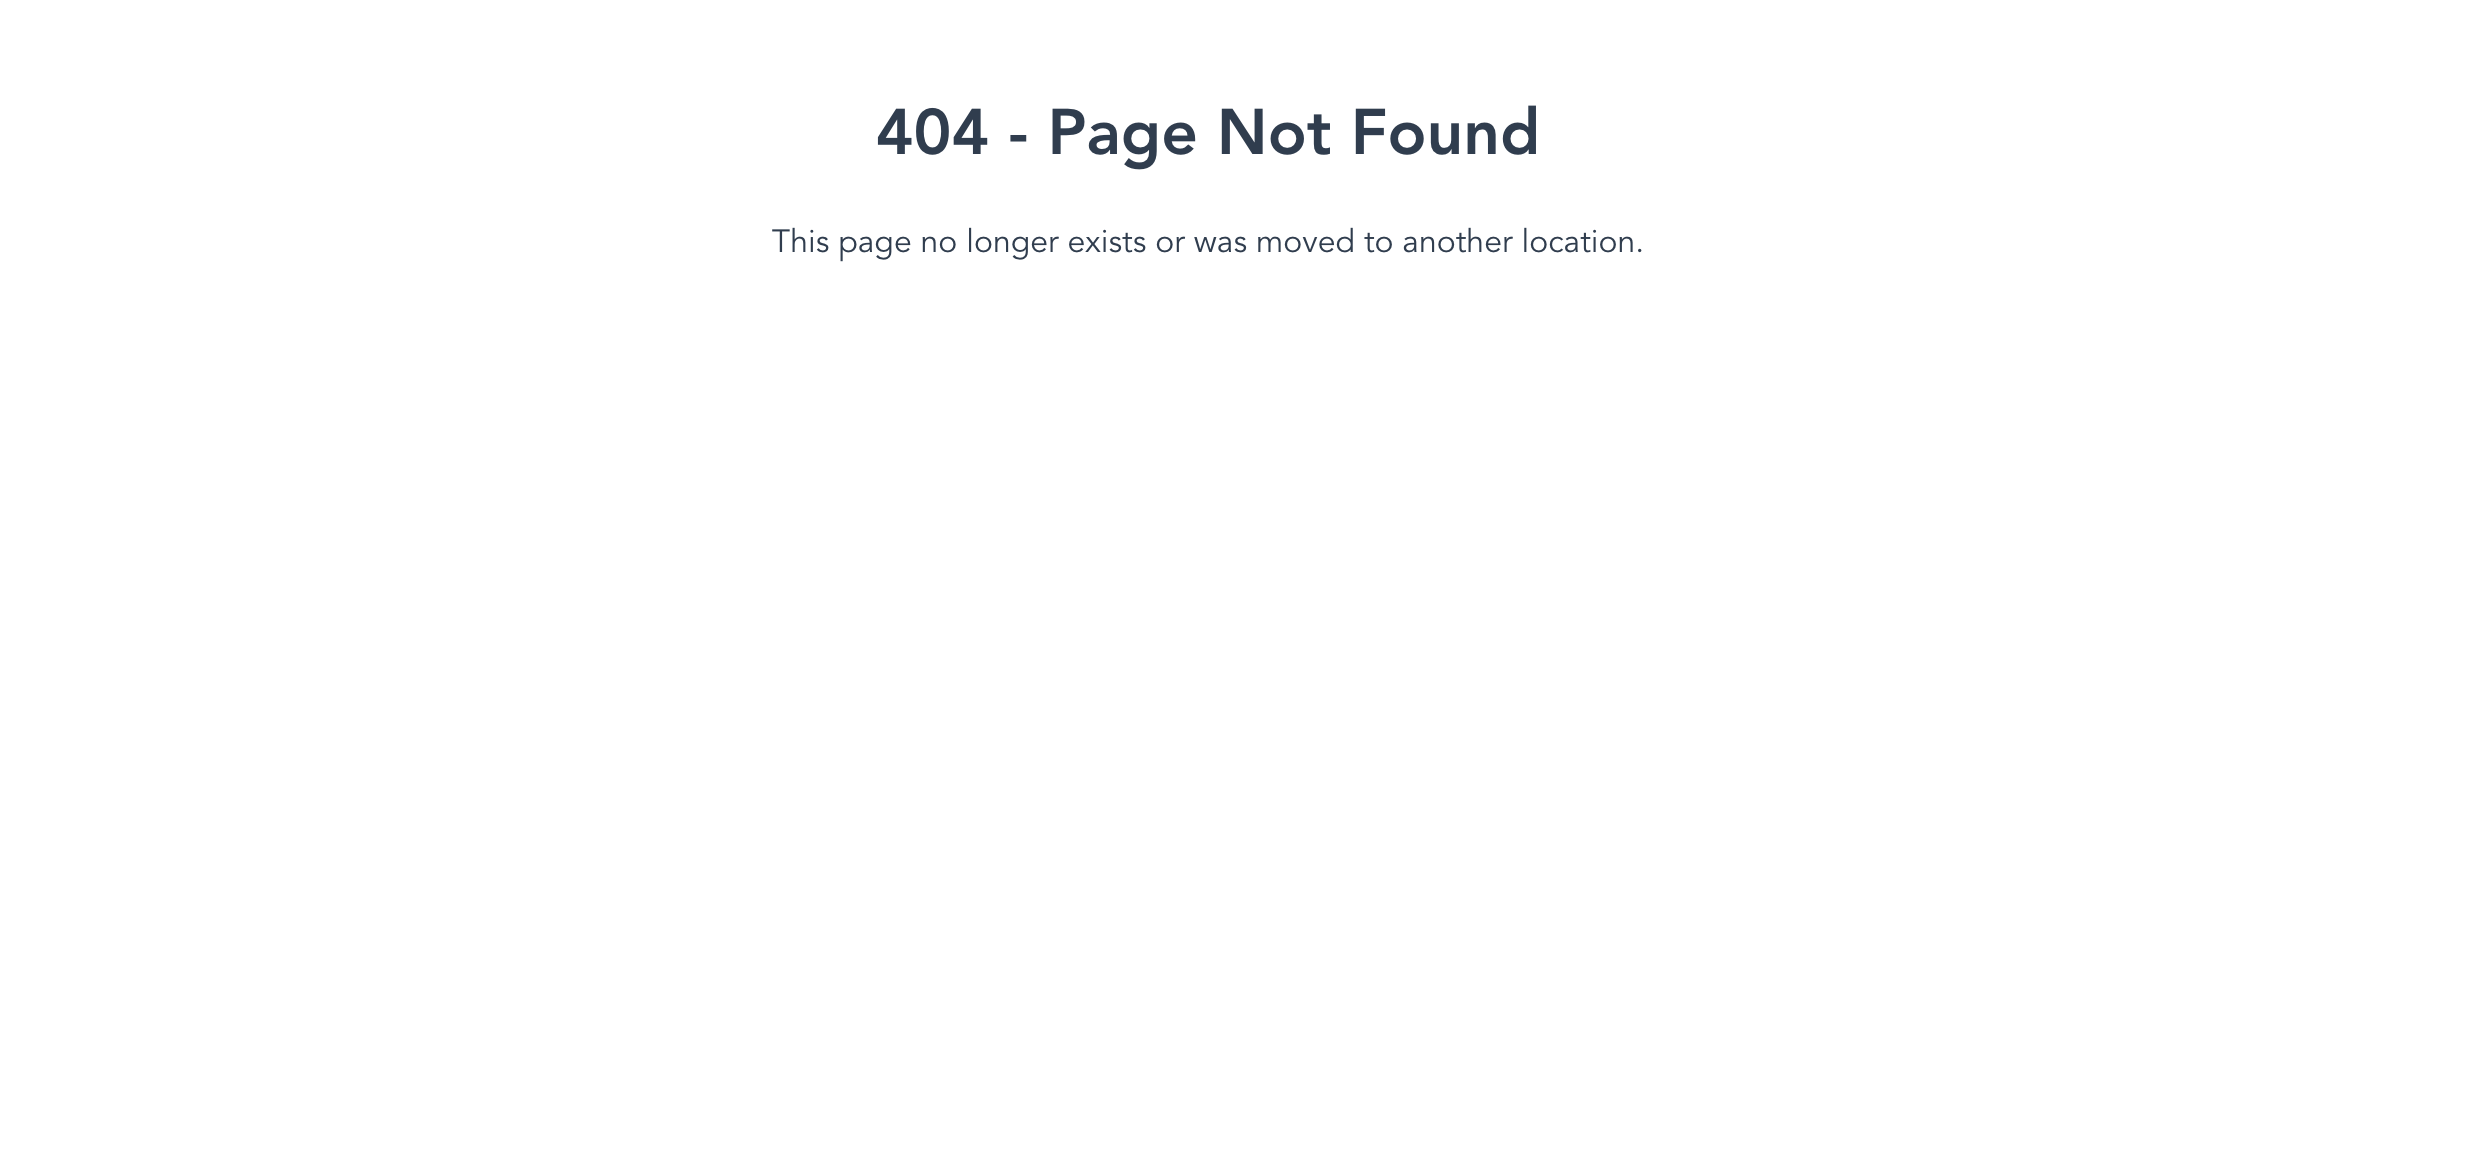 A 404 page that tells the user that the page they are looking for has not been found.